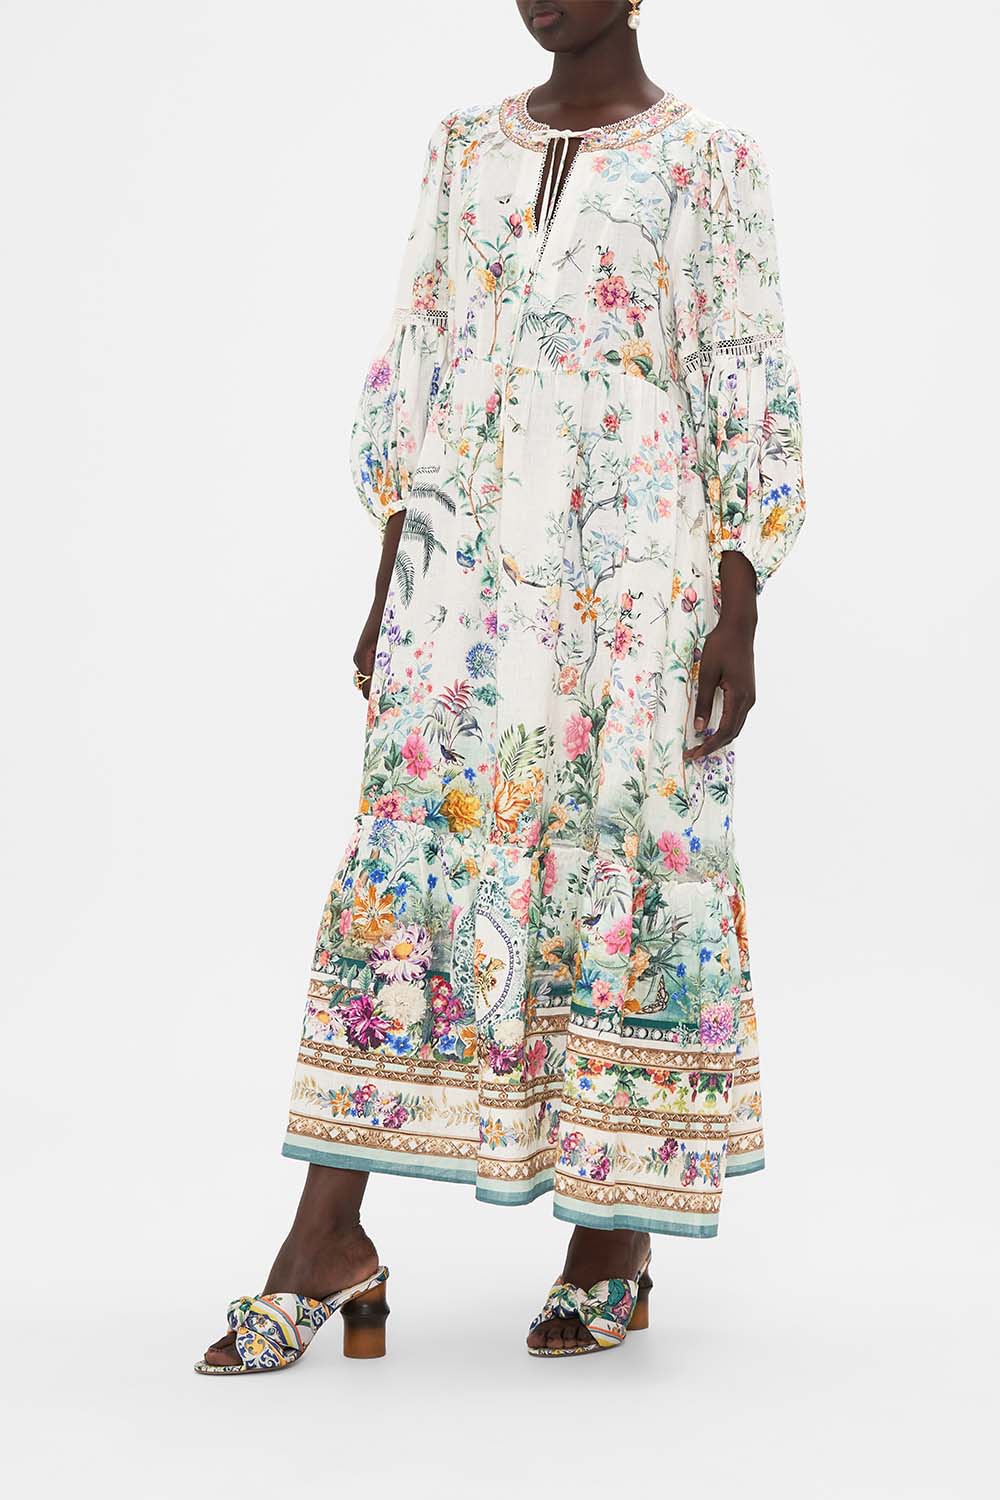 CAMILLA silk dress in Plumes and Parterres print